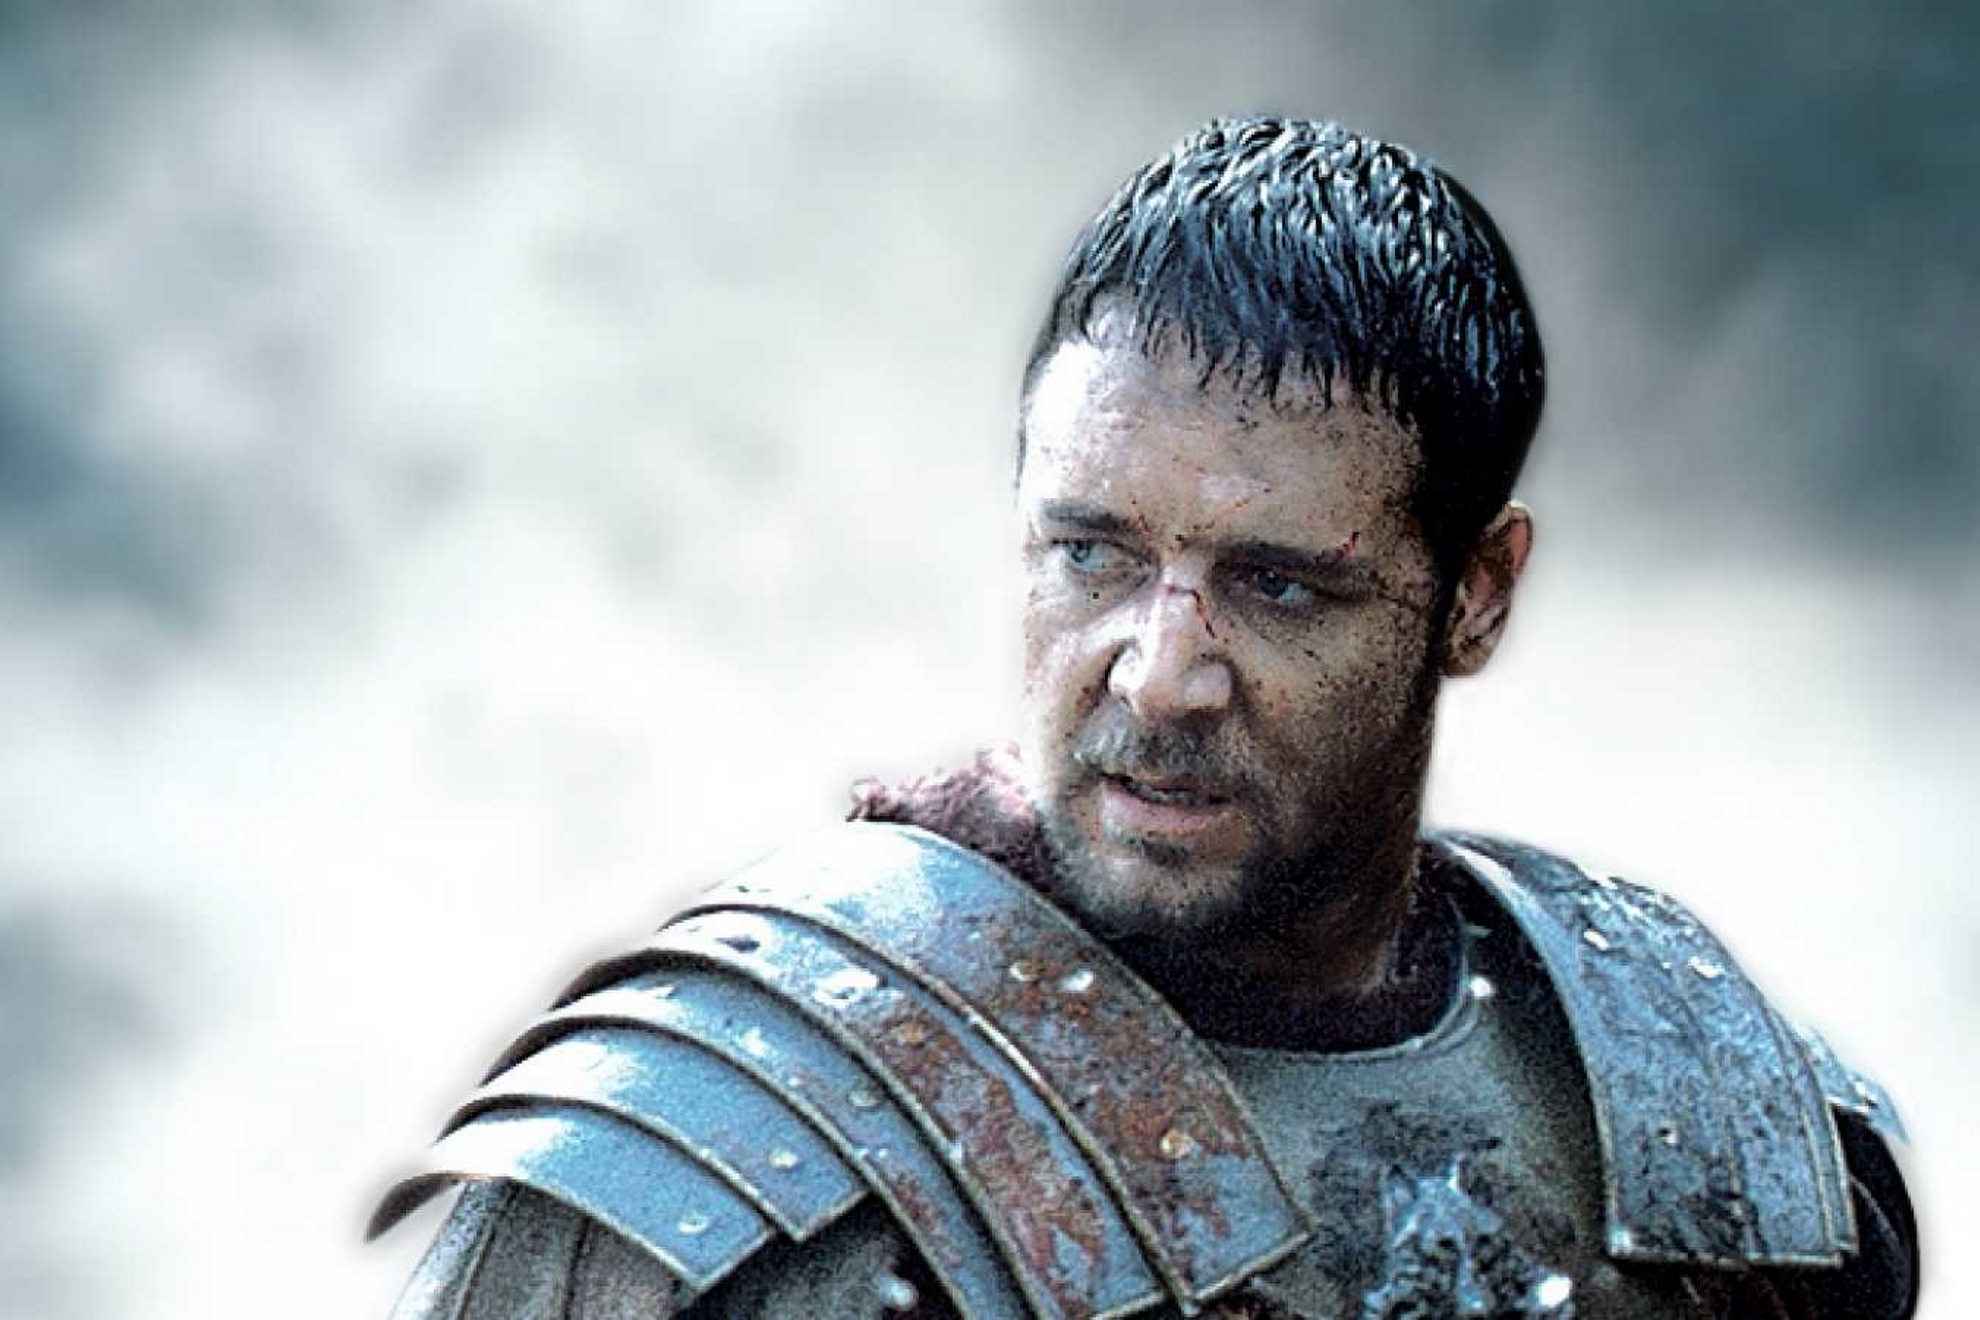 Six suffer injuries during 'Gladiator 2' filming in Morocco